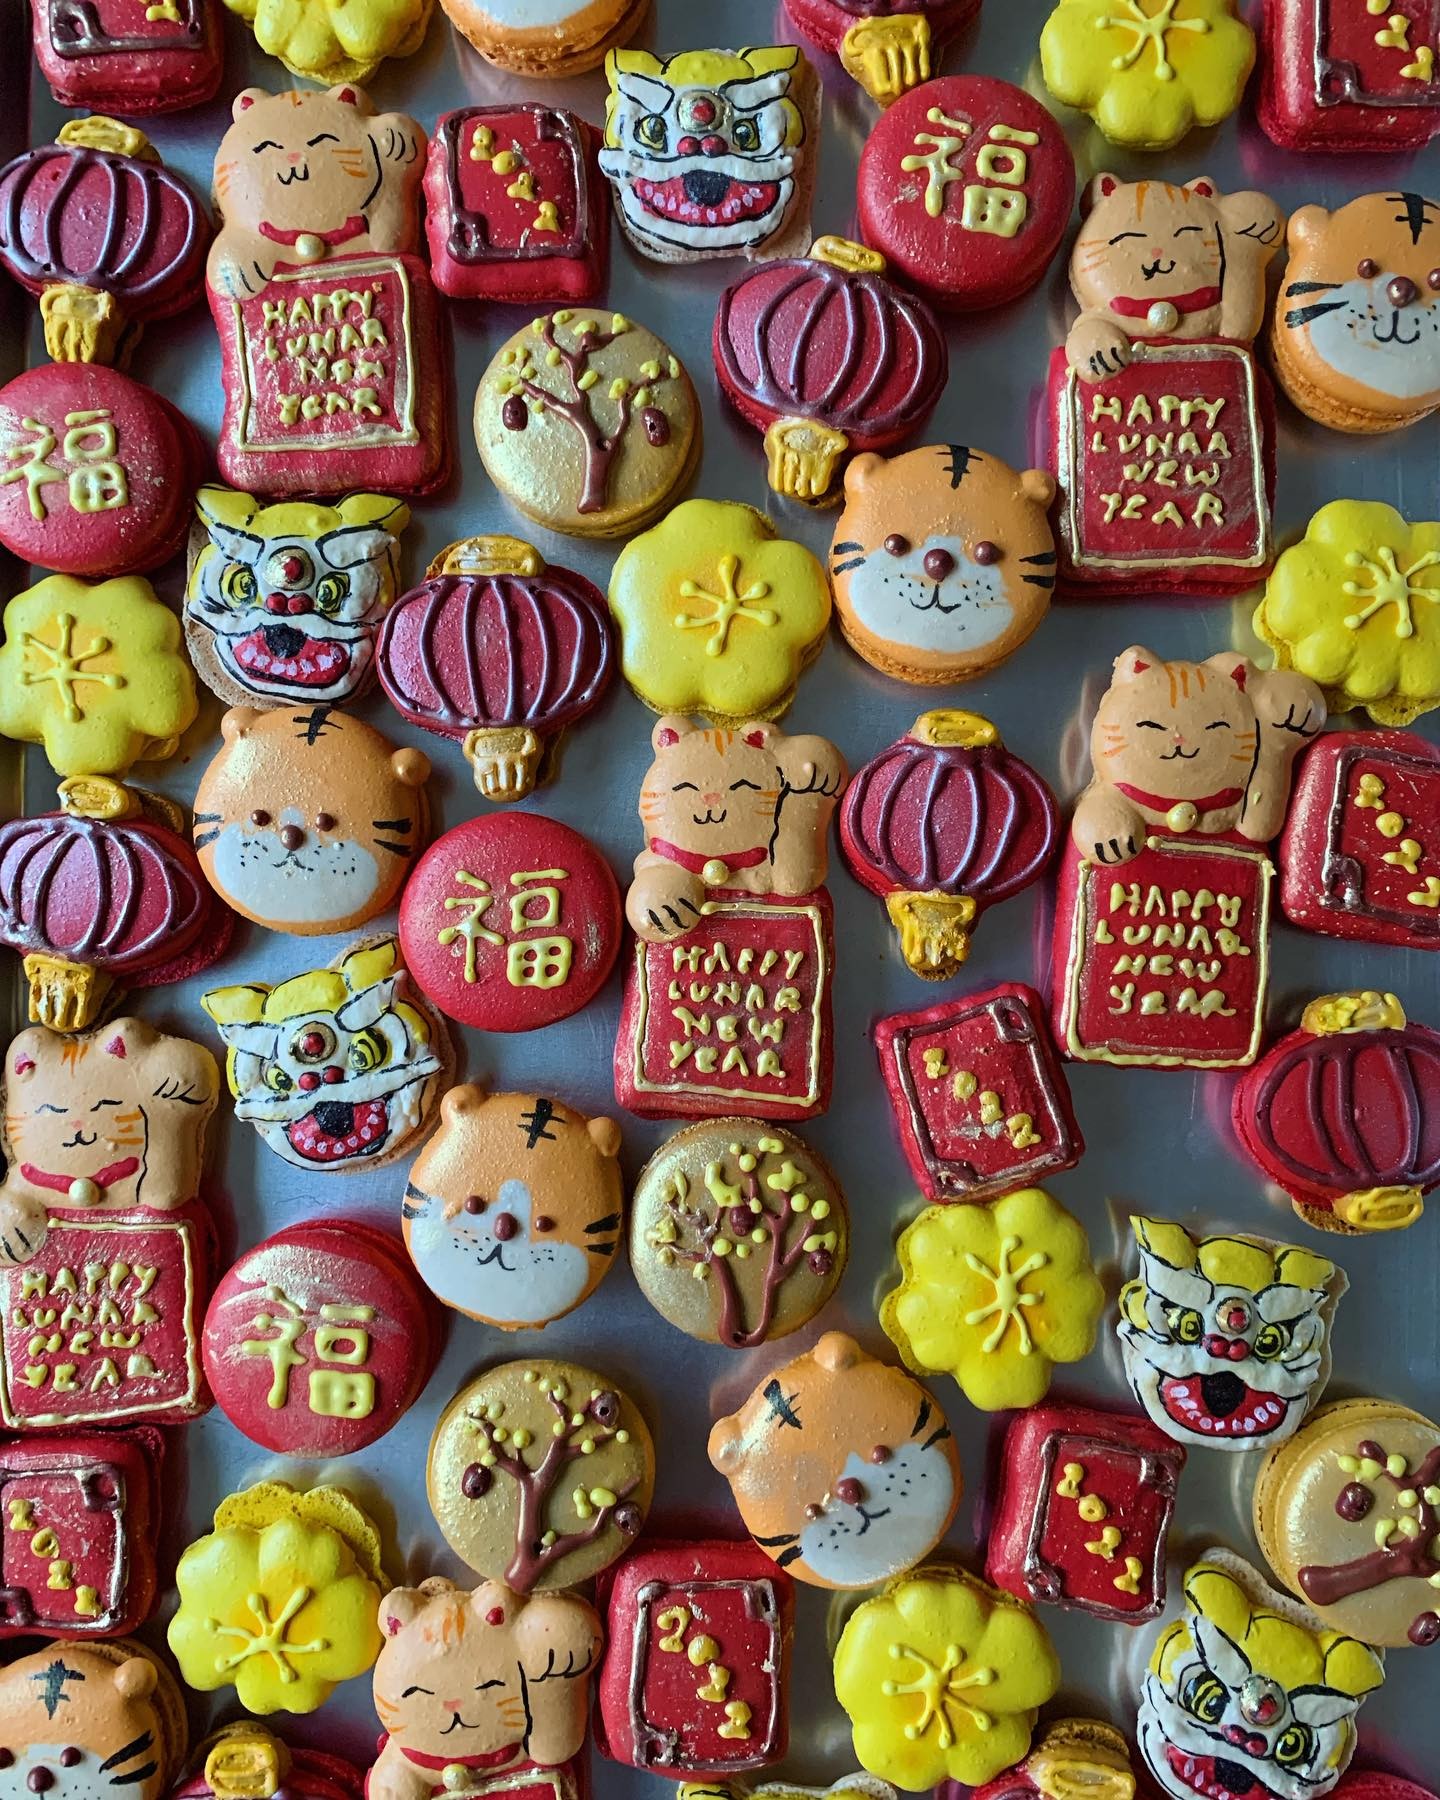 Cookies in the shape of tiger faces, dragon faces, and lanterns.